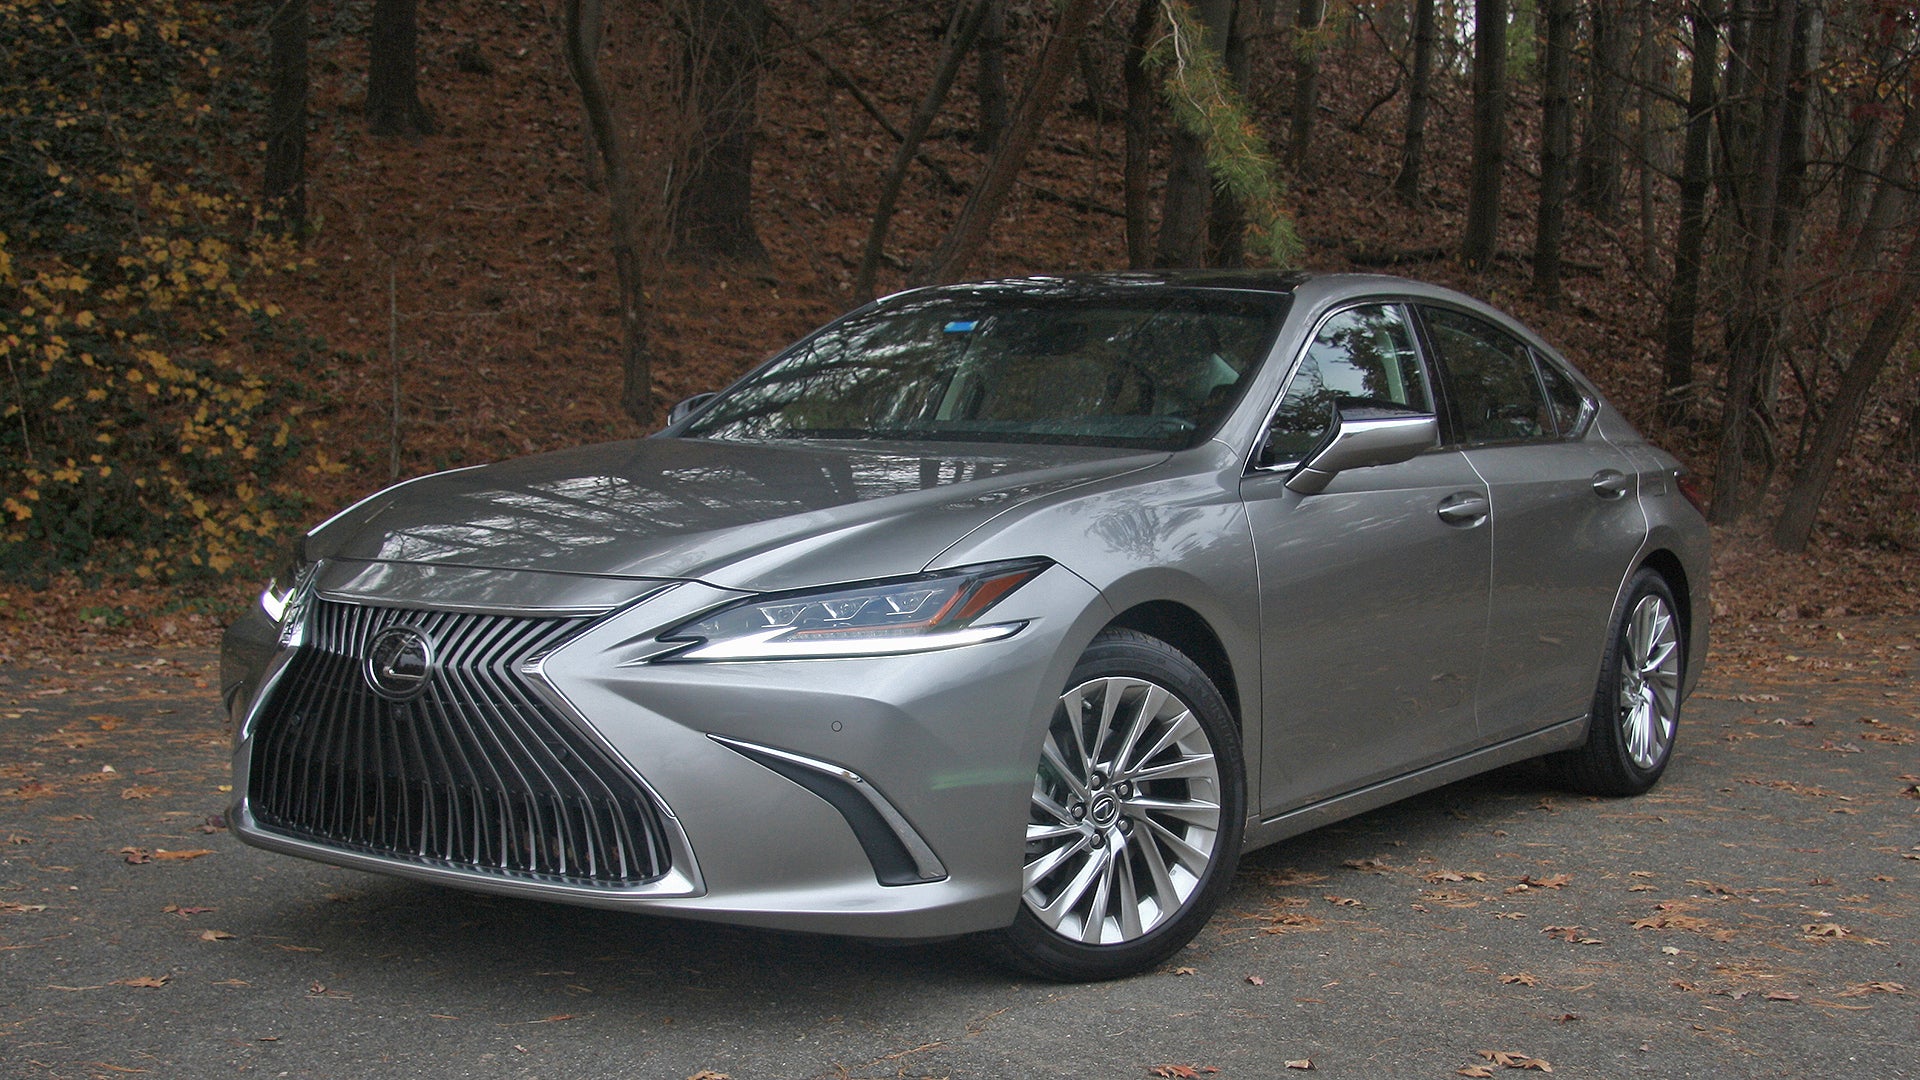 2019 Lexus ES 350 New Dad Review Smooth Is Good, But Can